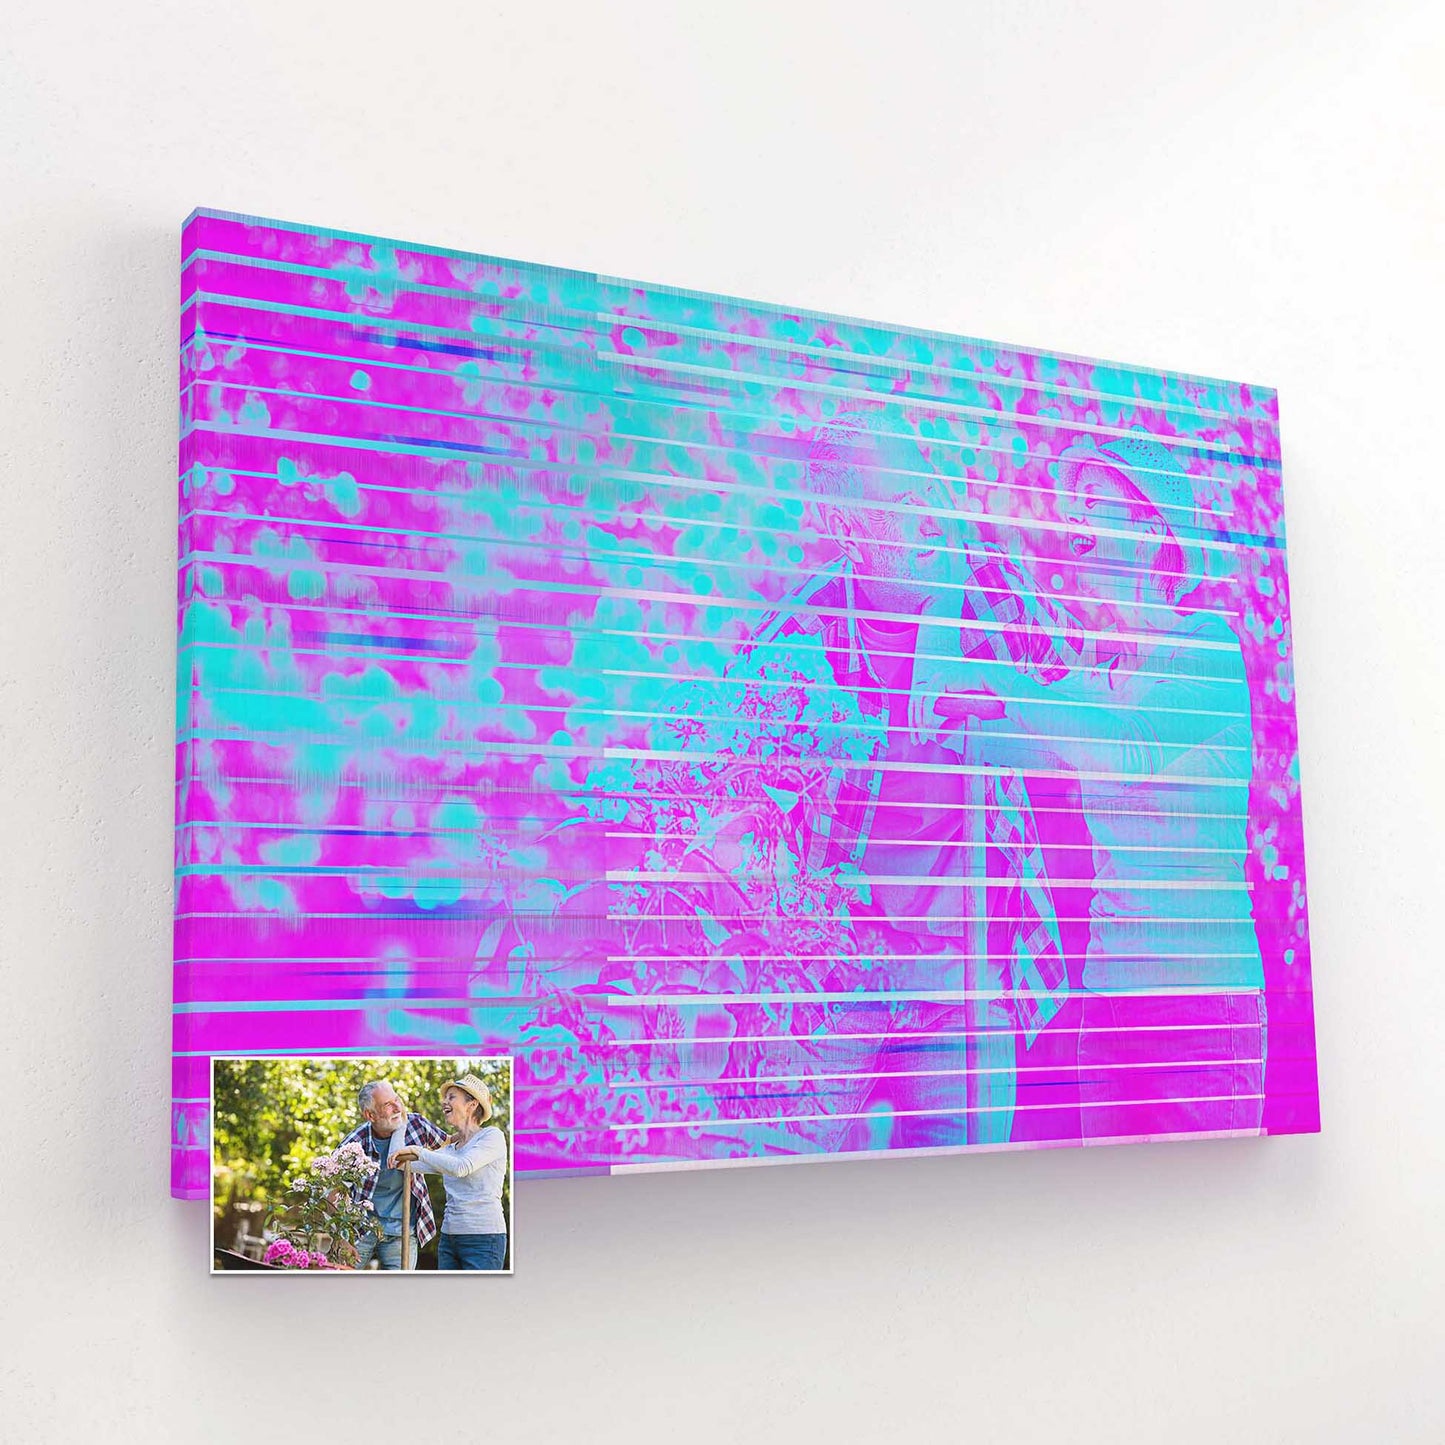 Transform your cherished photo into a one-of-a-kind masterpiece with our Personalised Purple & Blue Canvas. The intricate texture and mesmerizing effect create a visually stunning display. Each piece is carefully crafted to be original